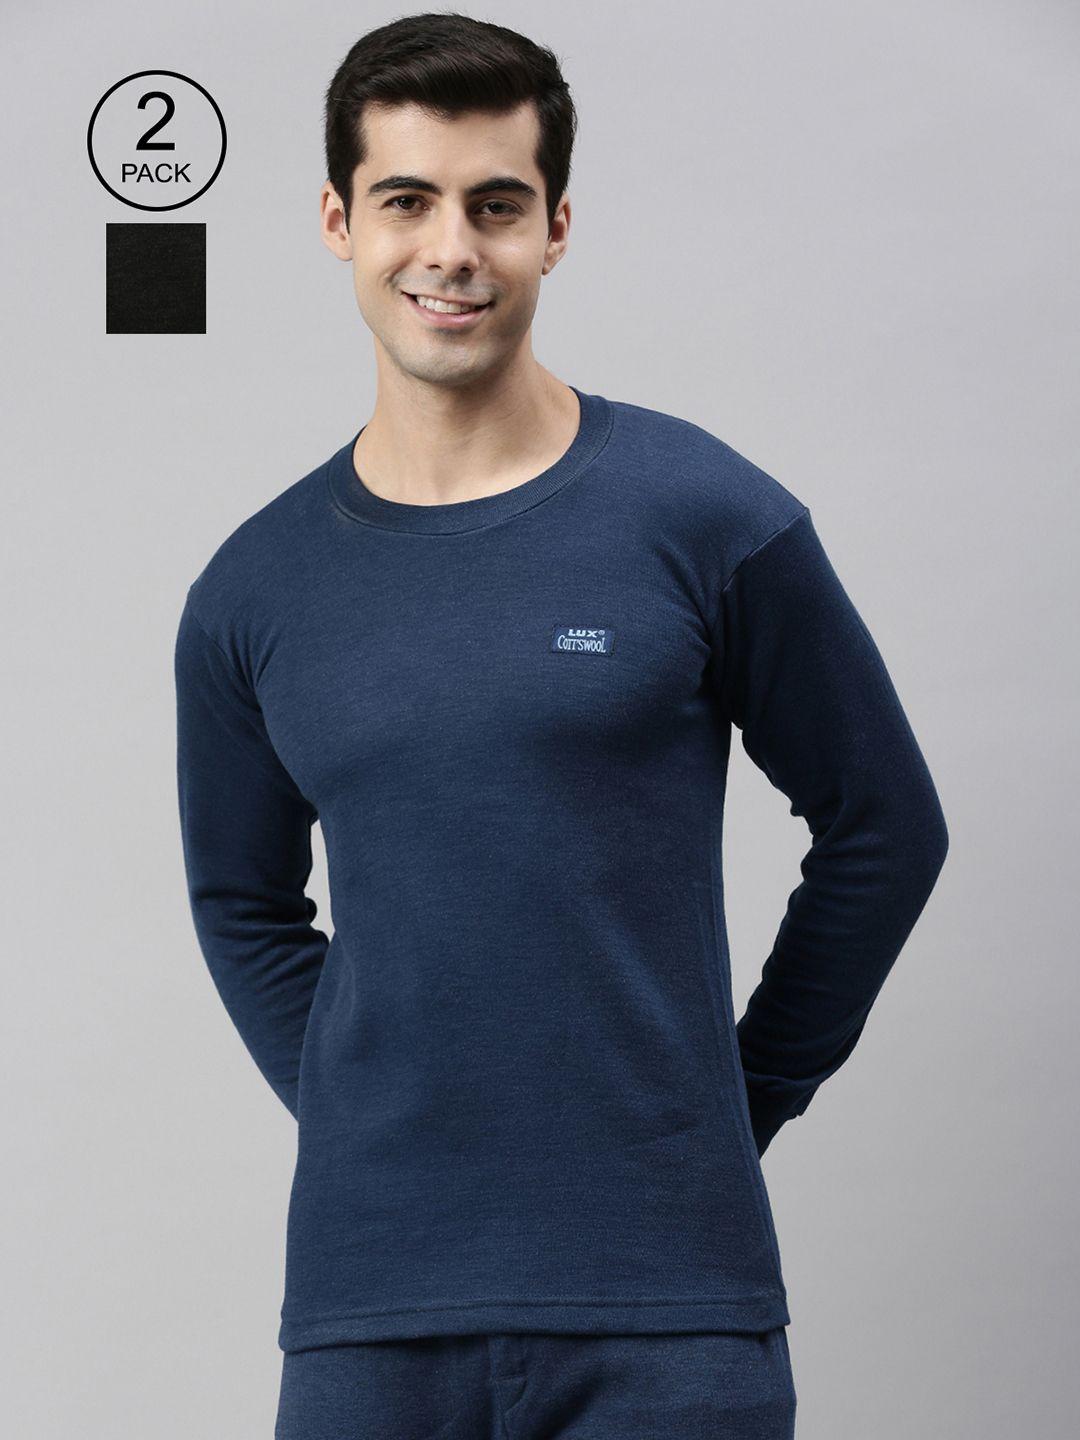 lux cottswool men pack of 2 black & blue solid cotton thermal tops